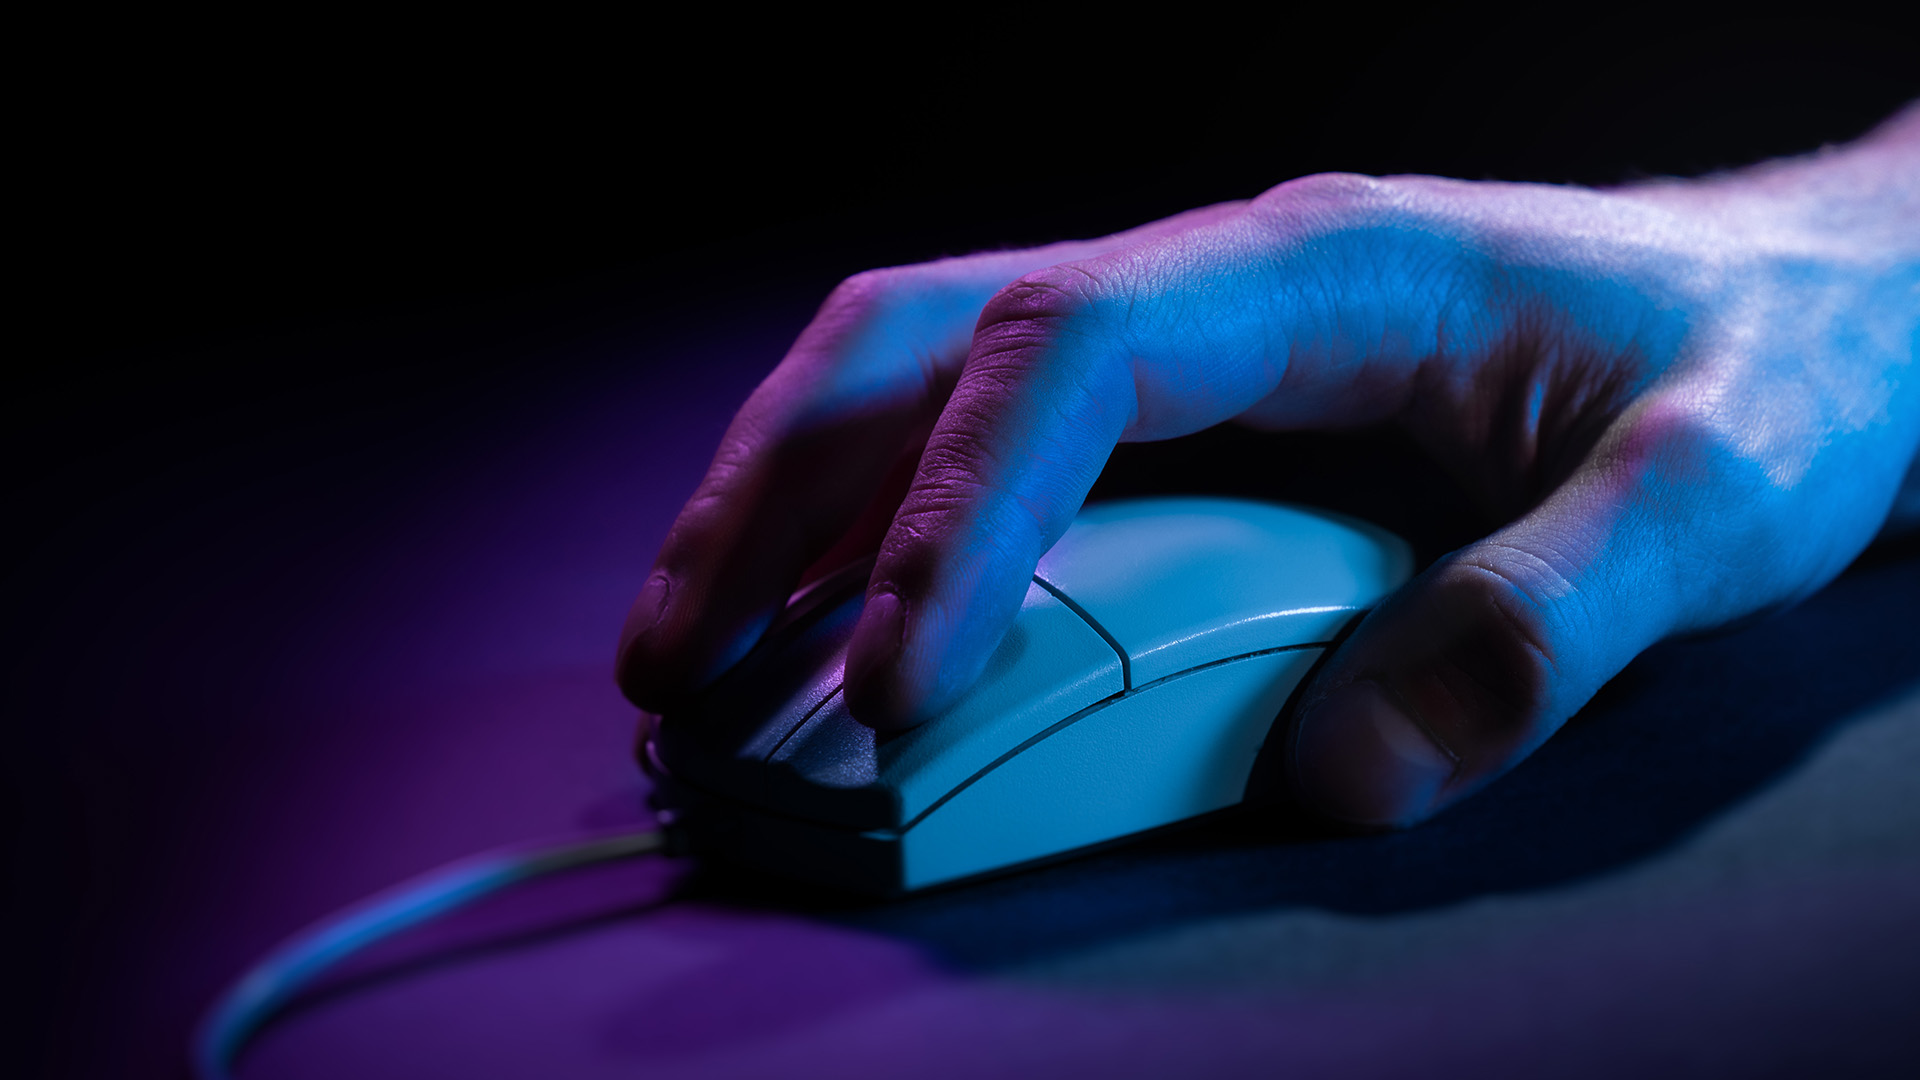 A hand rests on a computer mouse